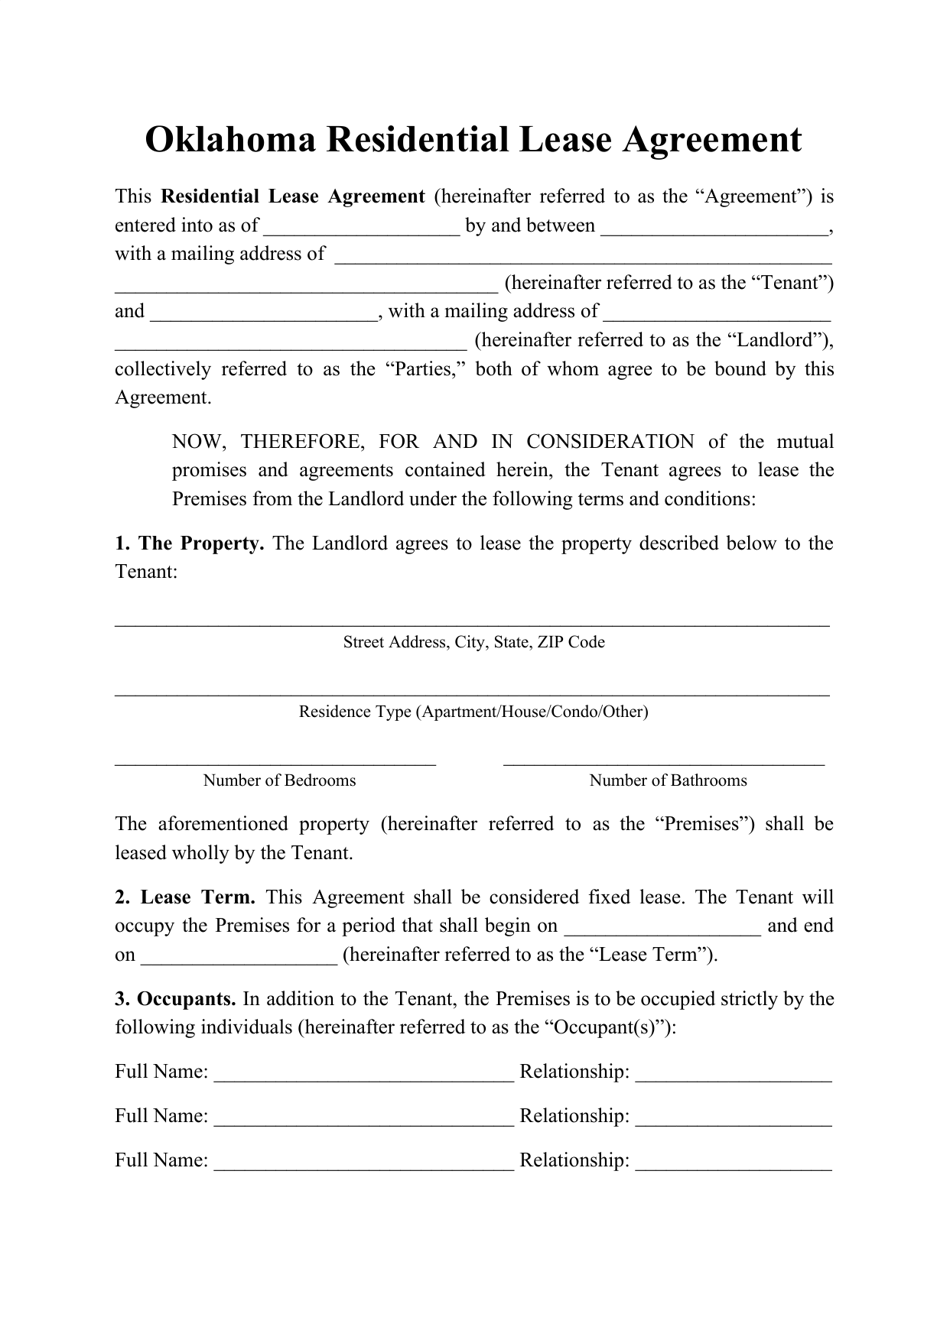 oklahoma-residential-lease-agreement-template-fill-out-sign-online-and-download-pdf